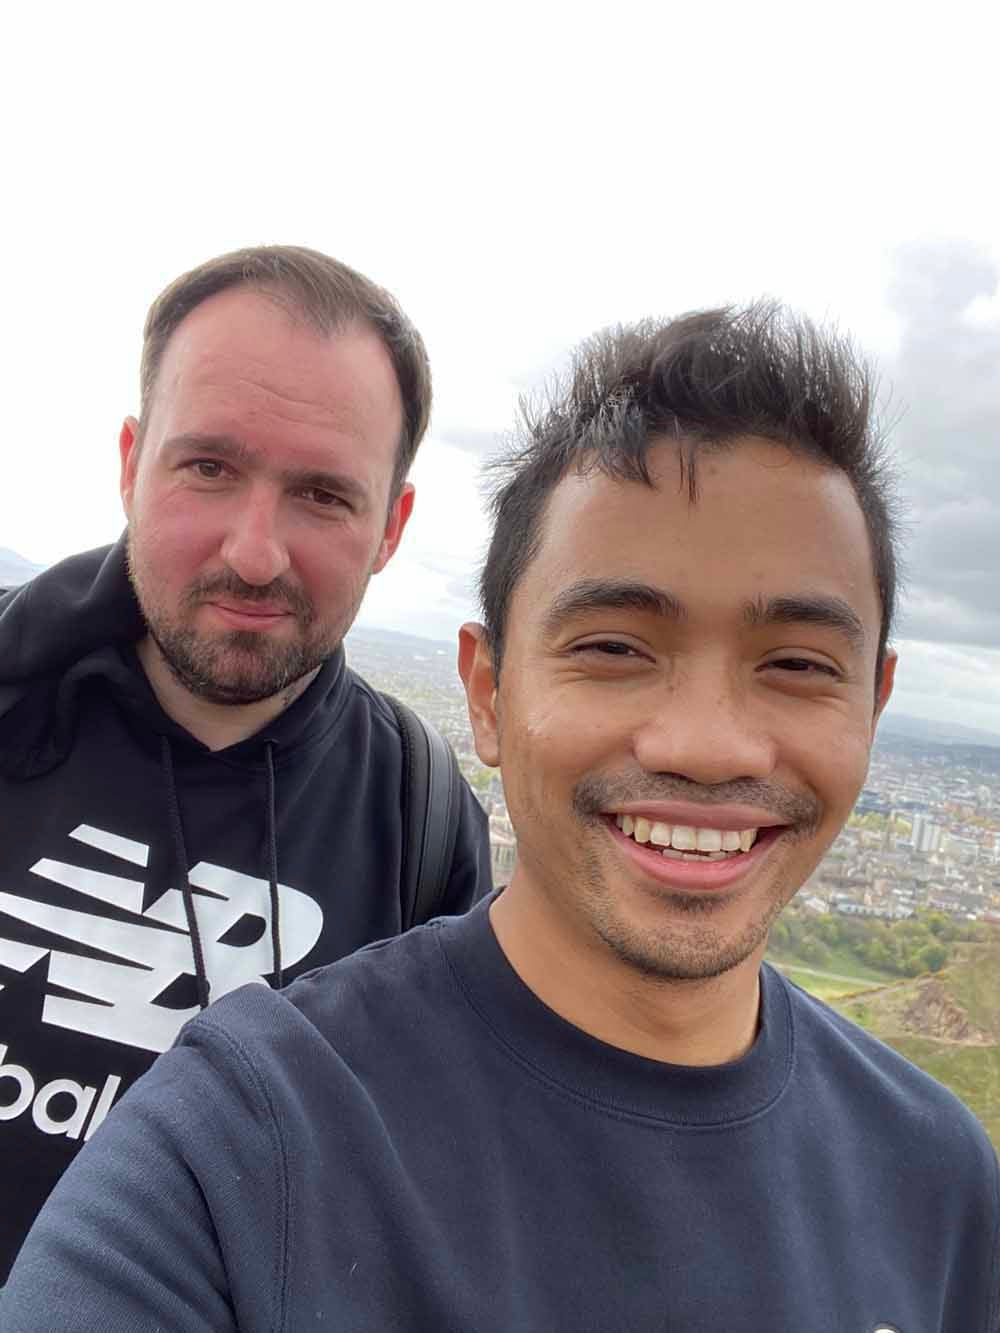 Aerjay and Lee now live together in Calgary, Alberta, Canada. (Collect/PA Real Life)